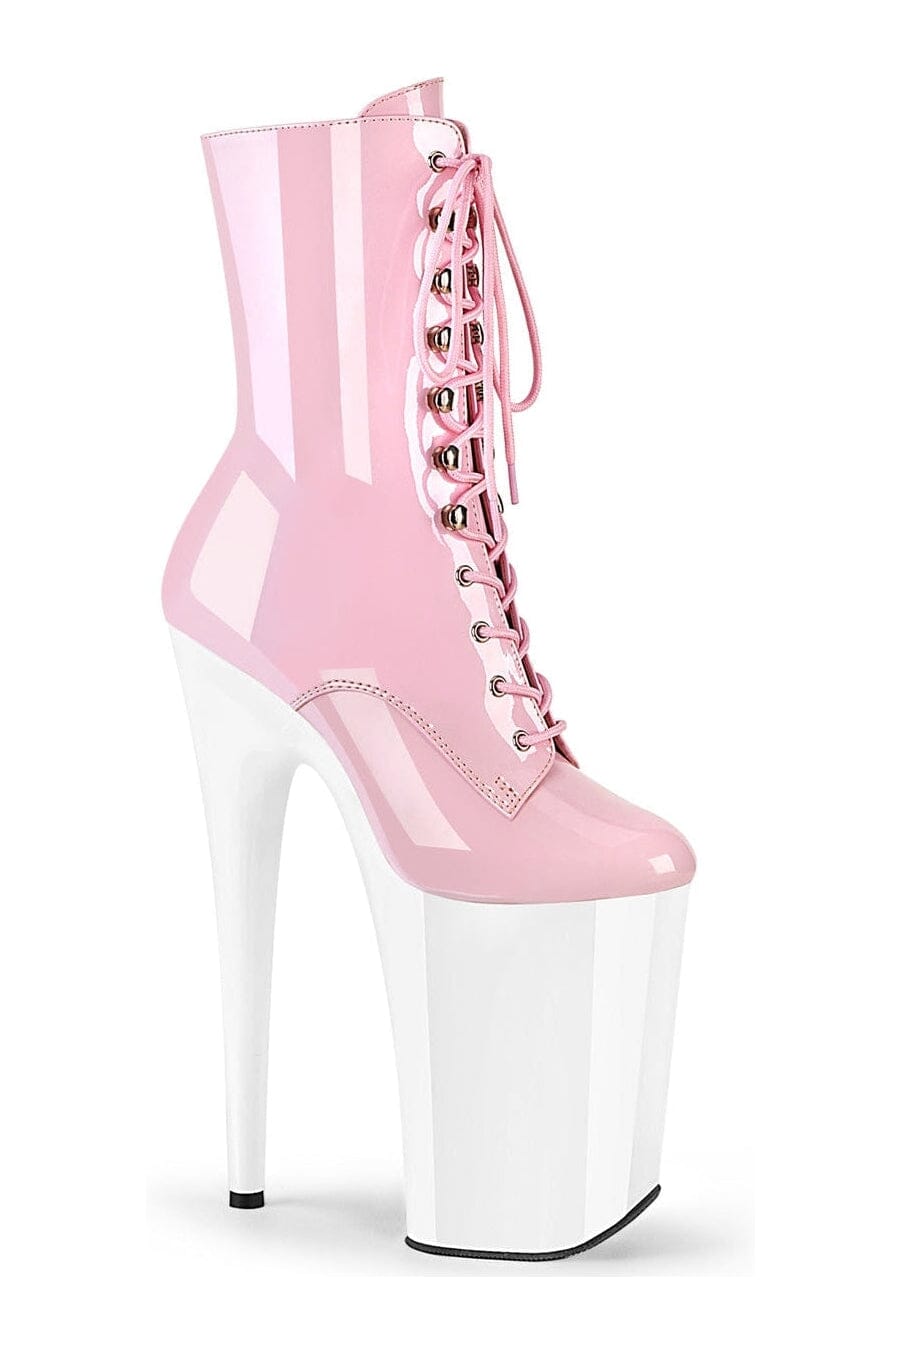 INFINITY-1020 Pink Patent Ankle Boot-Ankle Boots- Stripper Shoes at SEXYSHOES.COM